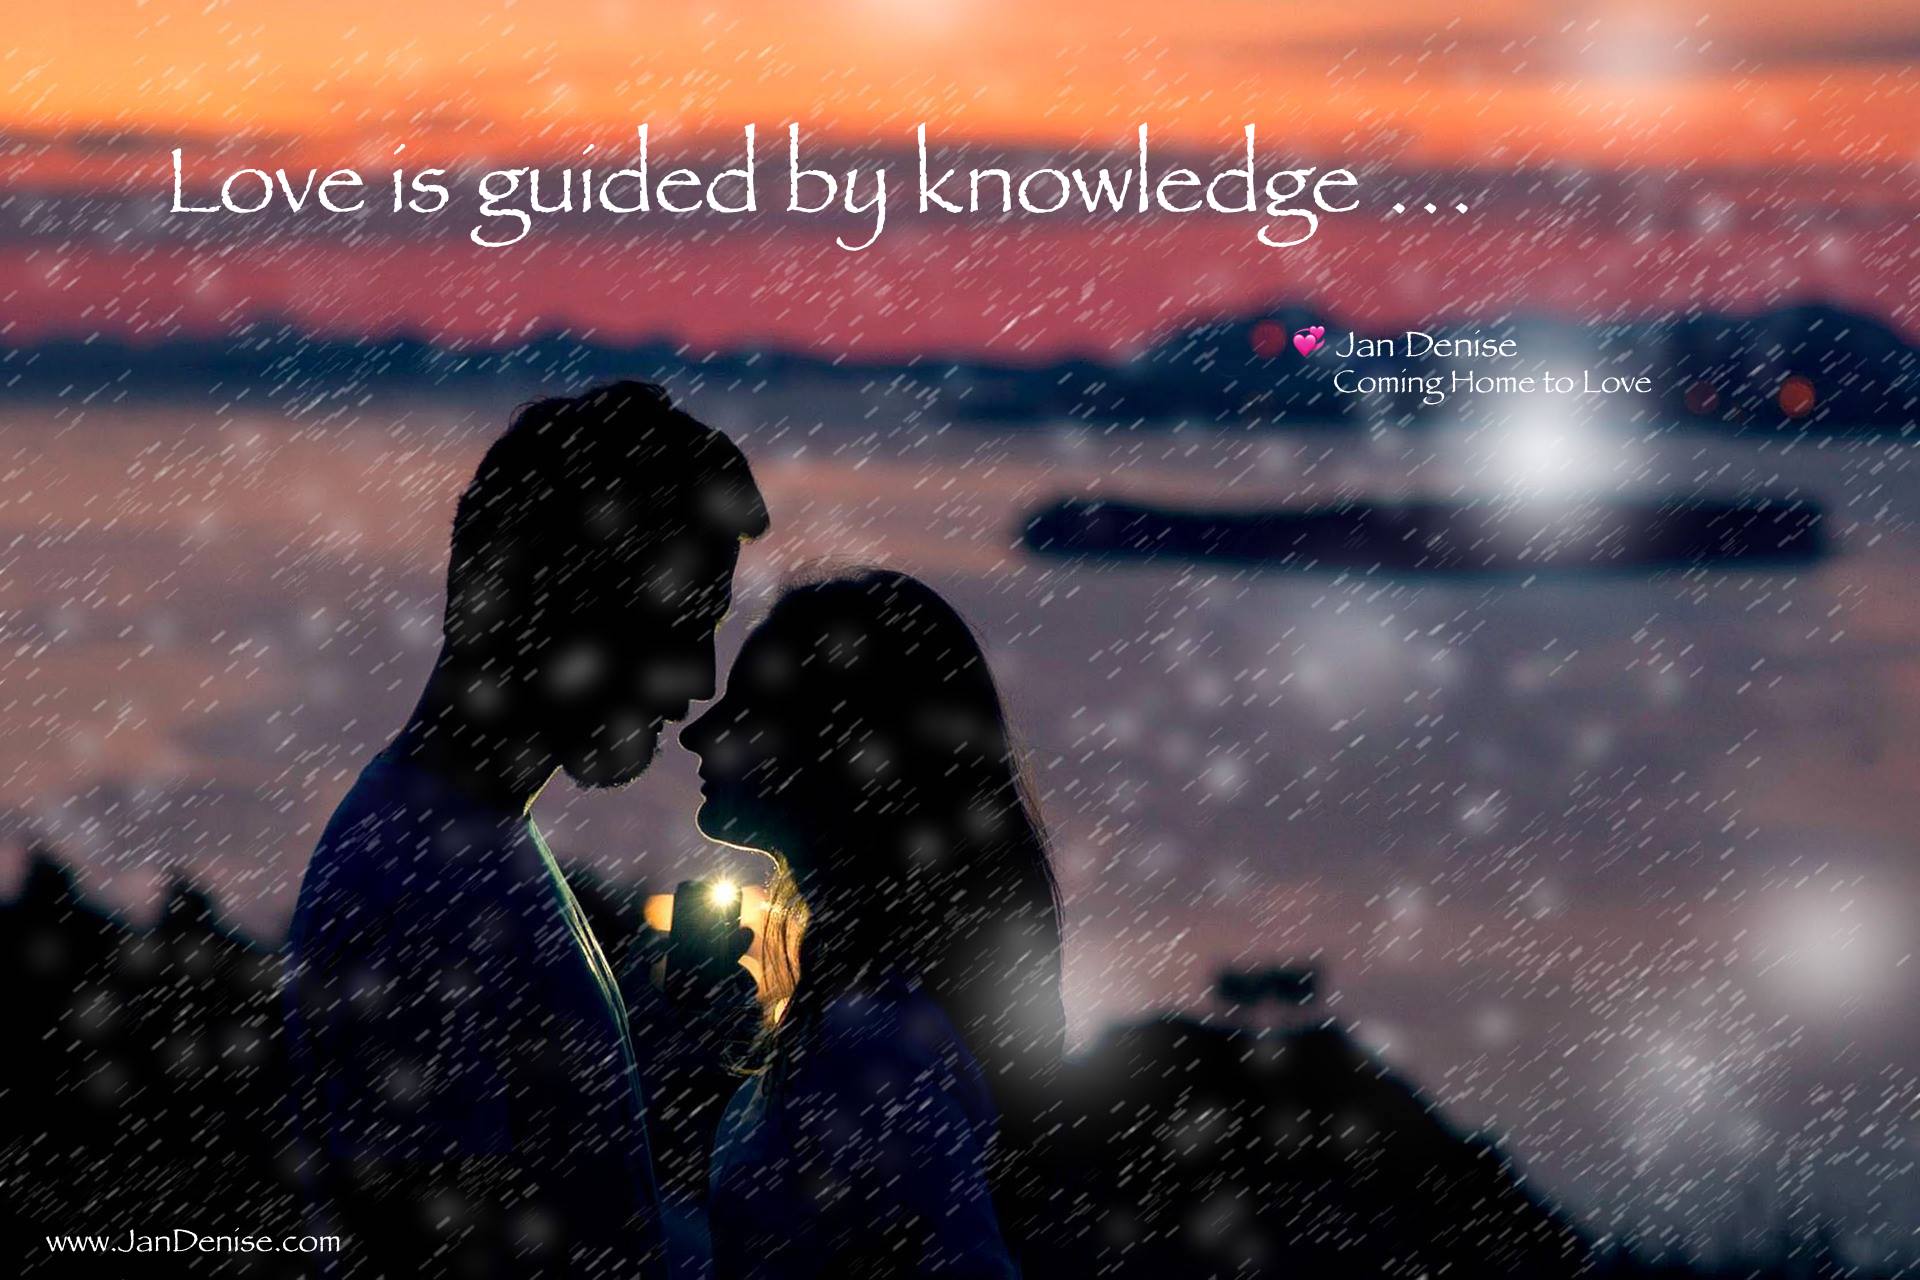 Let knowledge guide you …